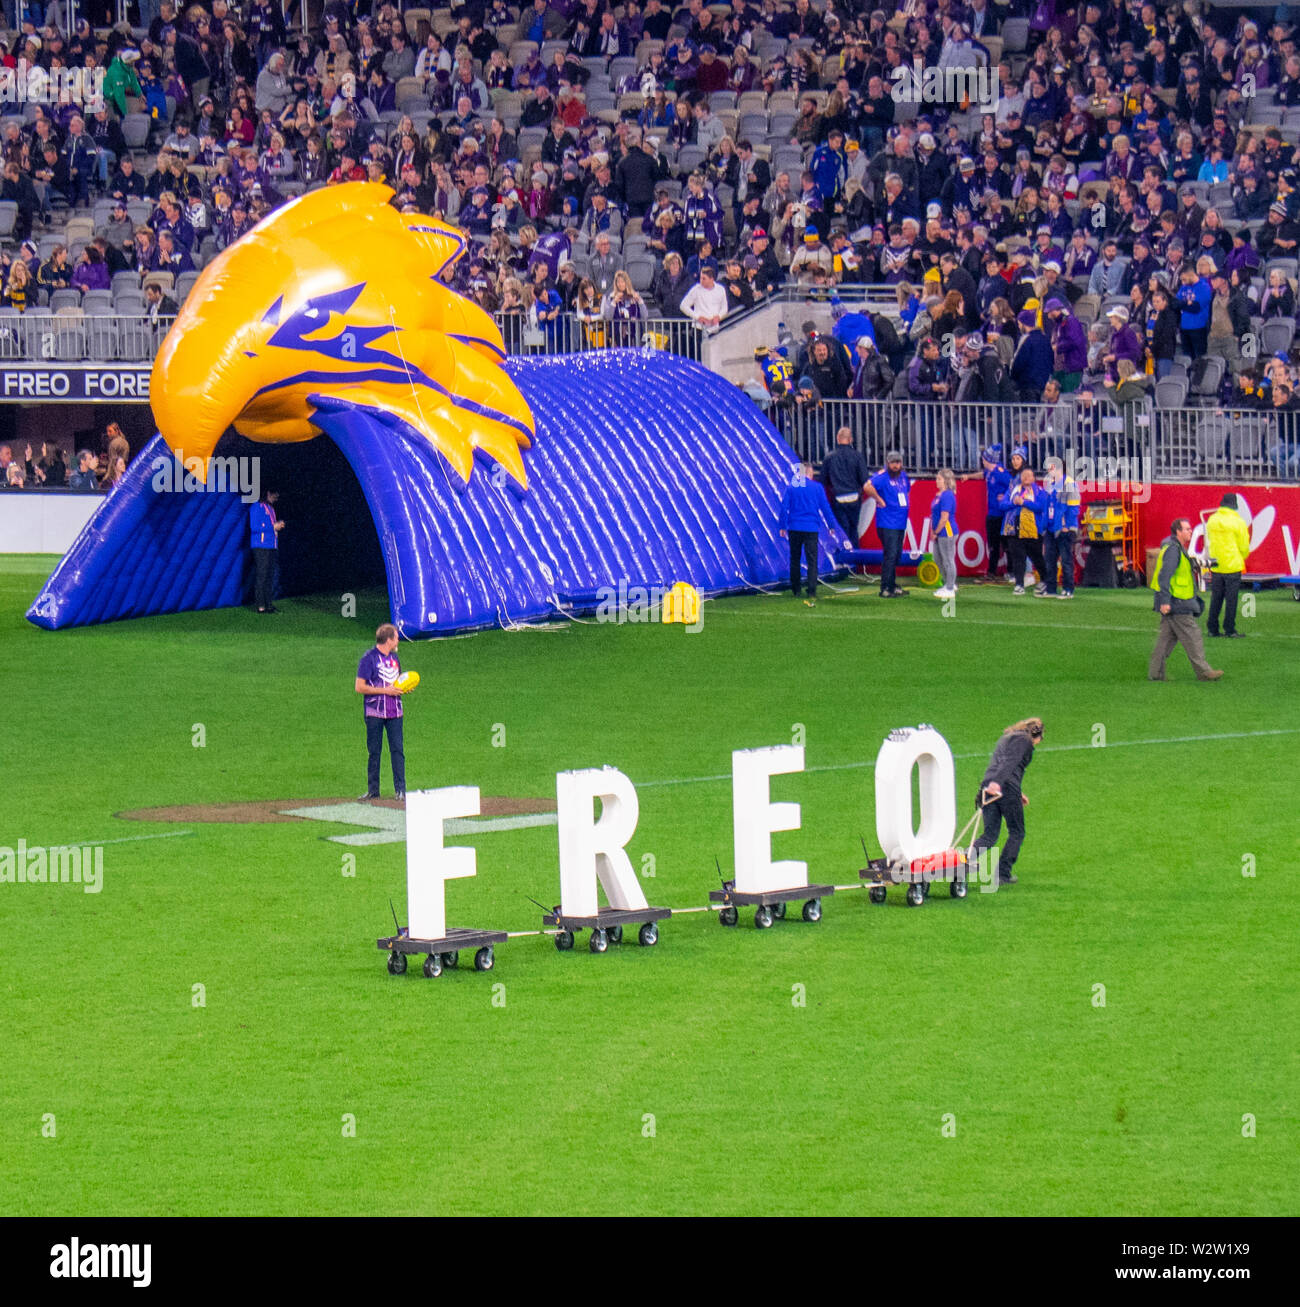 Inflatable tunnel  and Freo Sign at West Coast Eagles and Fremantle Dockers Western Derby AFL game at Optus Stadium Perth Western Australia. Stock Photo